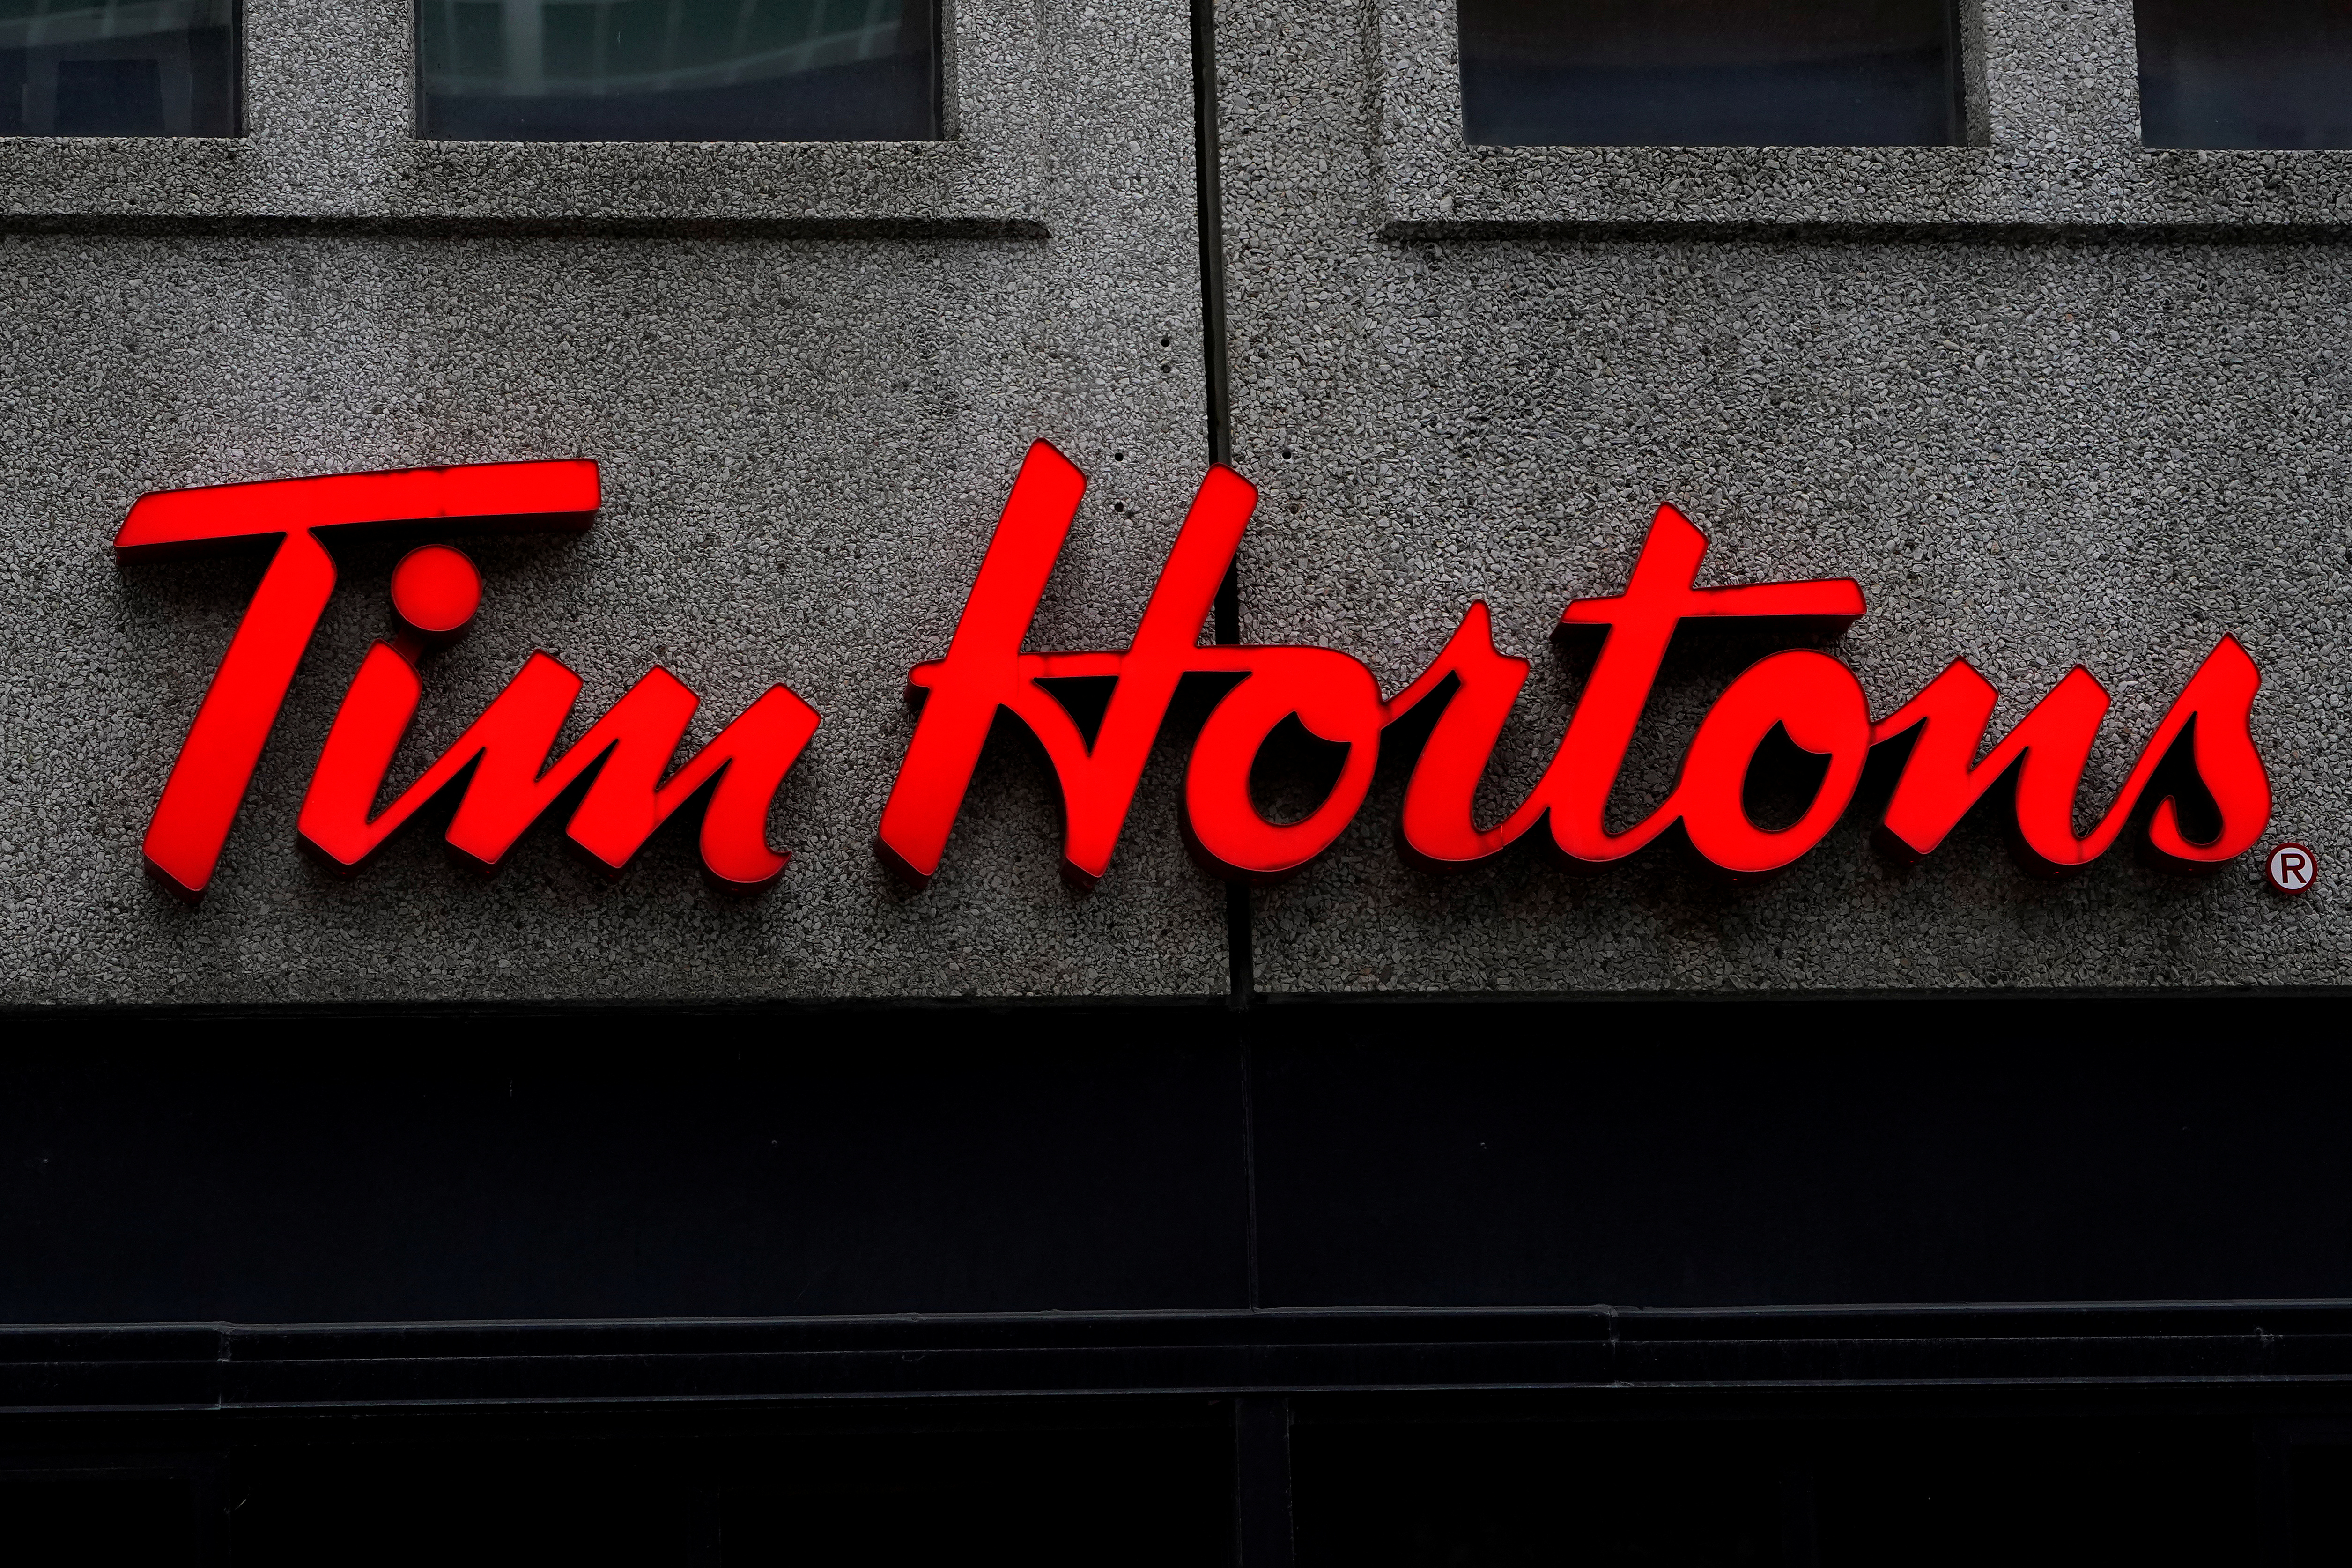 A Tim Hortons logo is pictured in Montreal, Quebec